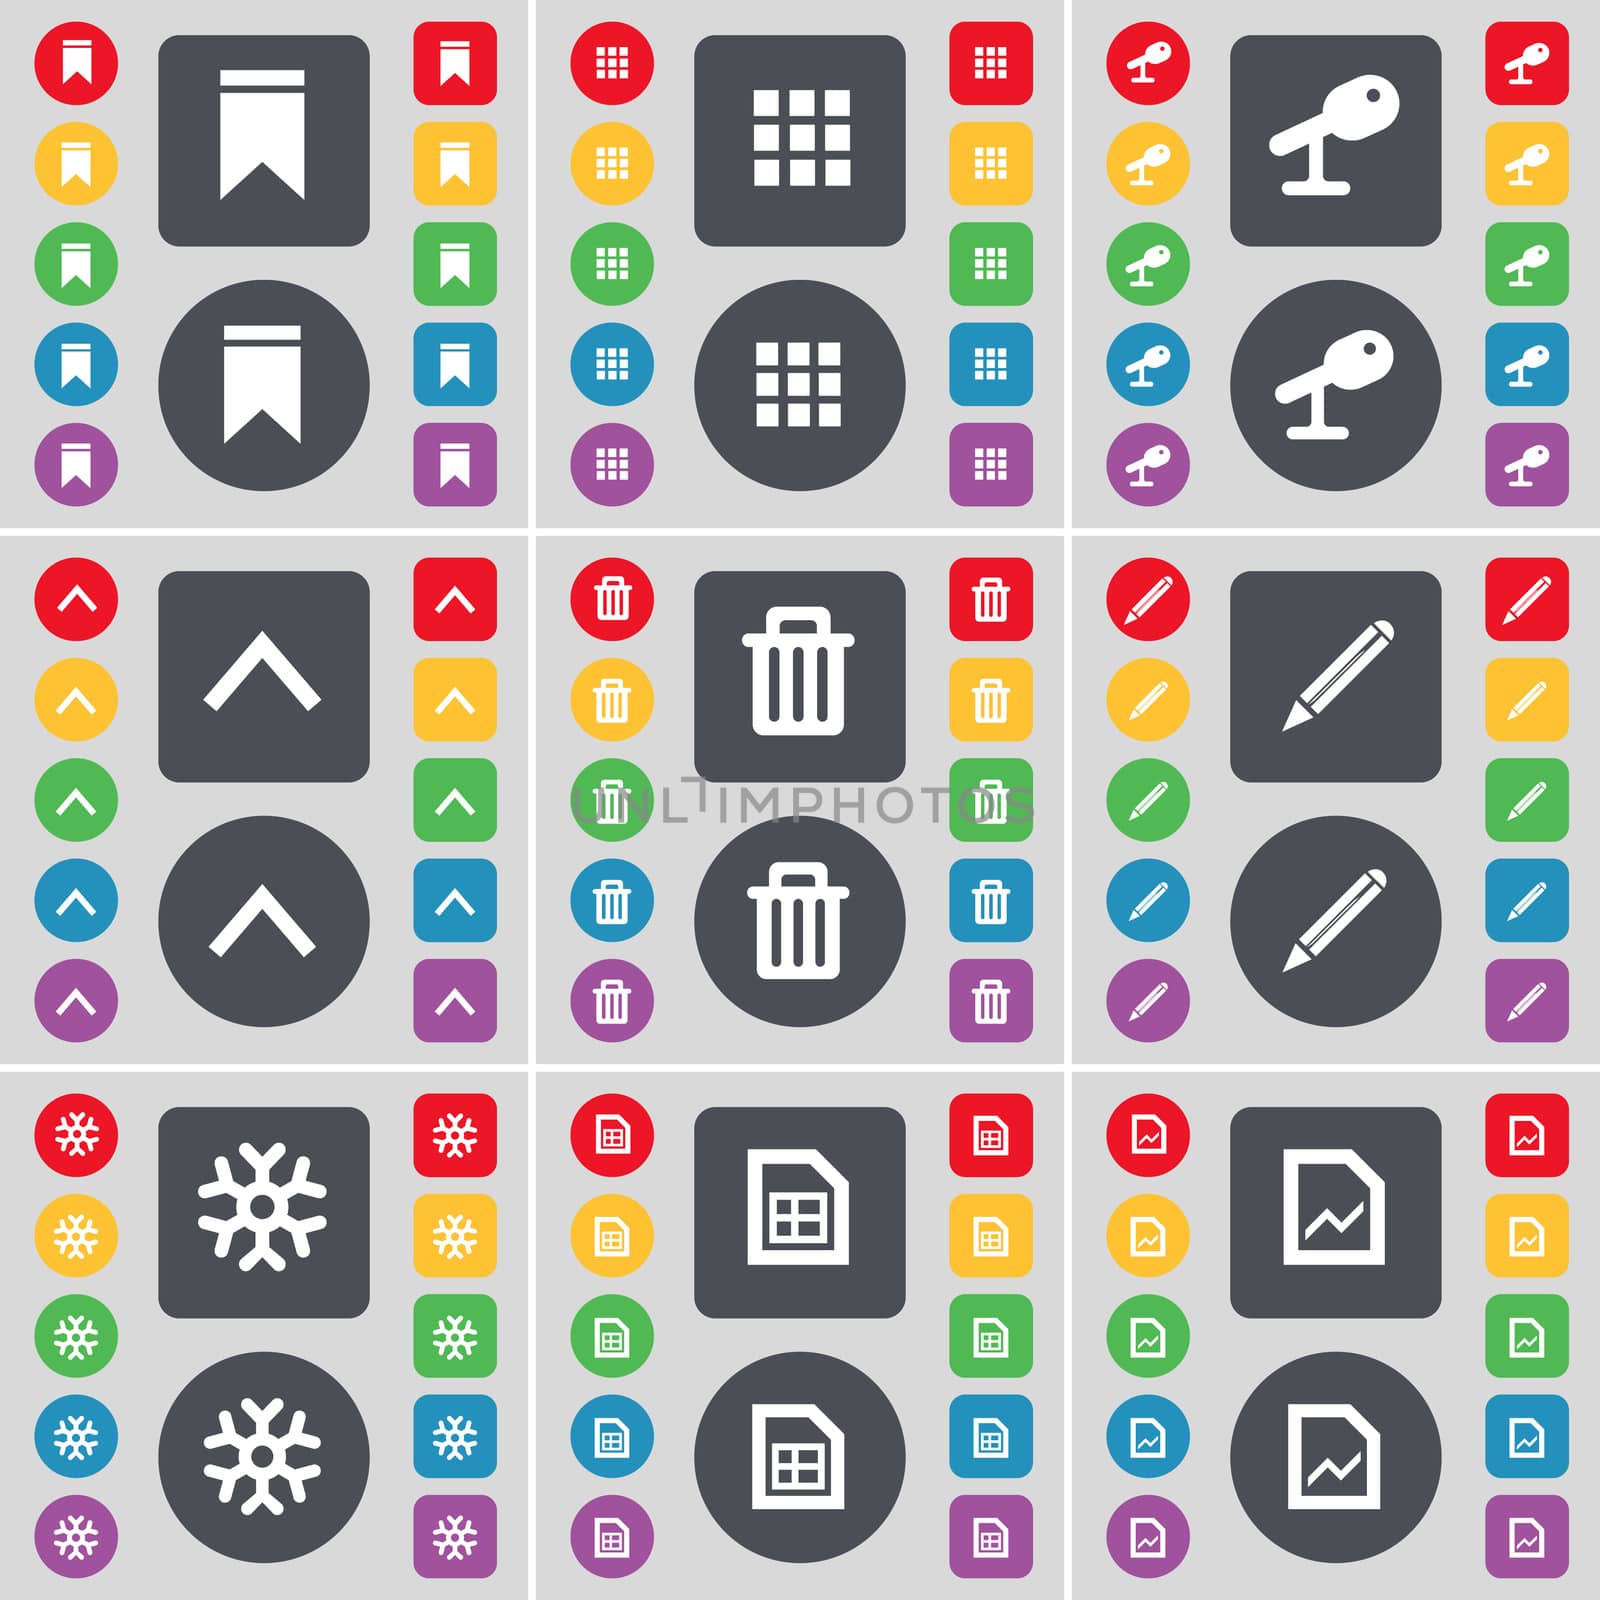 Marker, Apps, Microphone, Arrow up, Trash can, Pencil, Snowflake, Graph file icon symbol. A large set of flat, colored buttons for your design. illustration